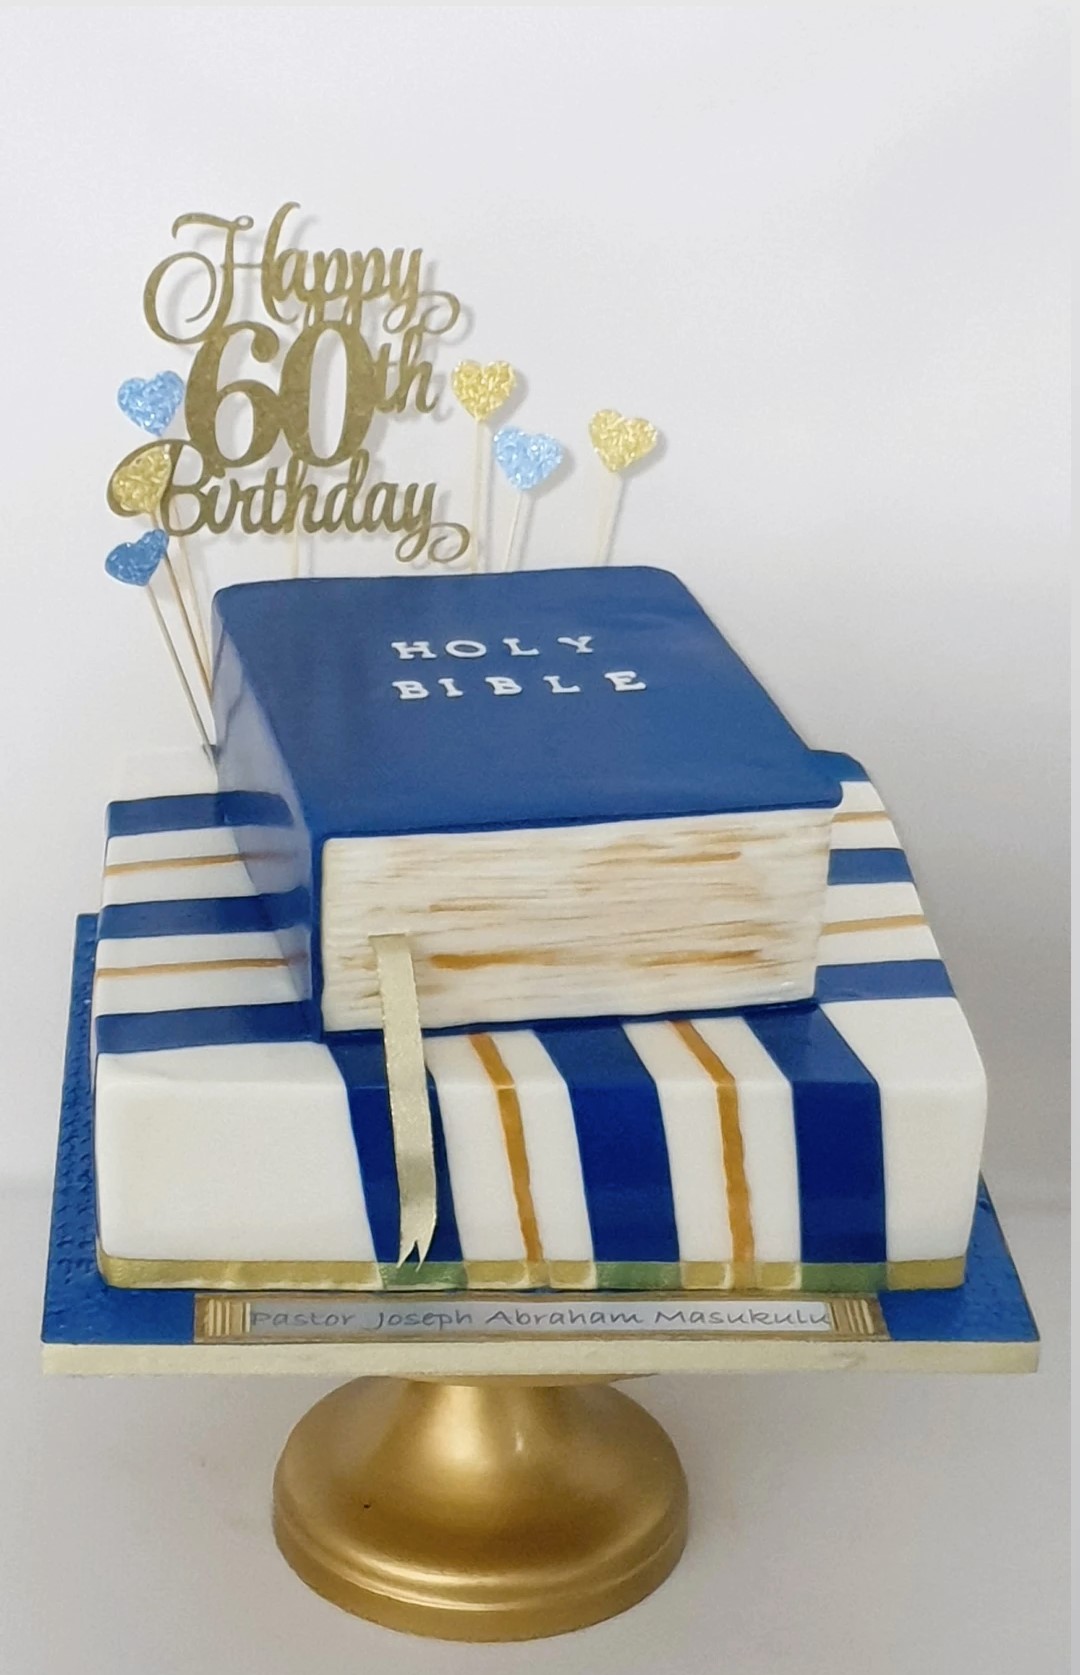 Closed Bible | Special Days Cakes